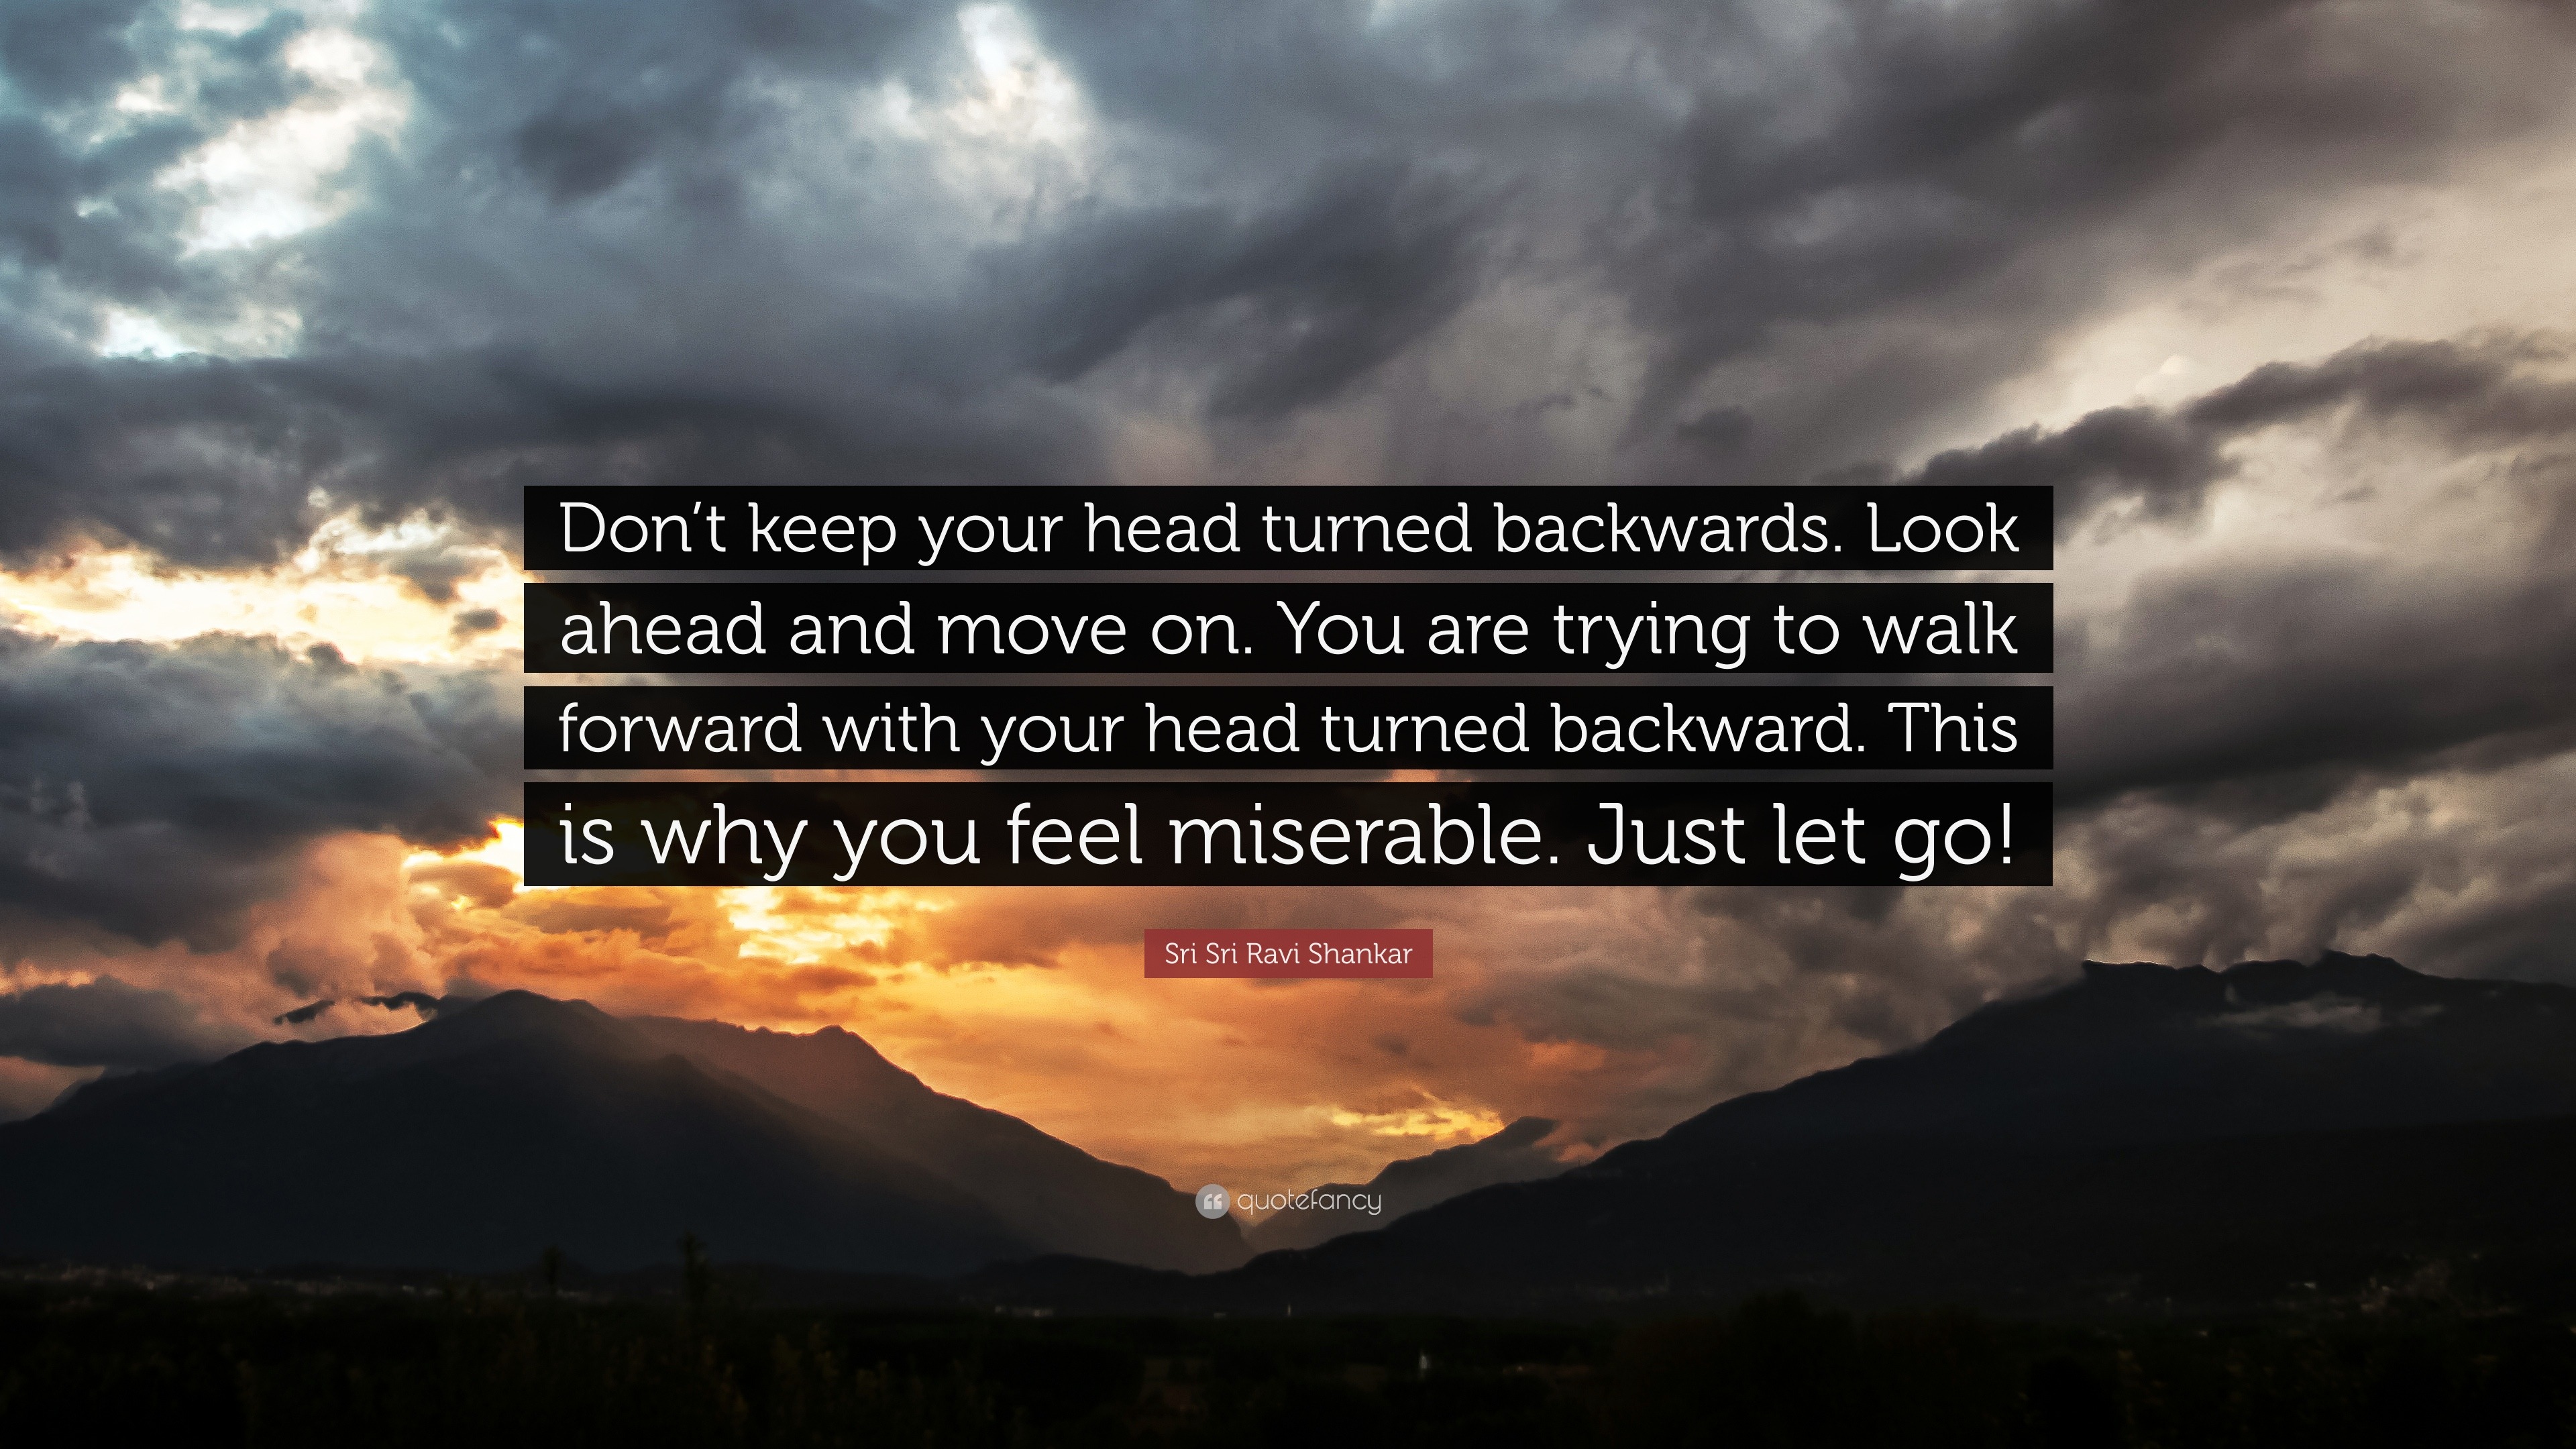 Sri Sri Ravi Shankar Quote Don T Keep Your Head Turned Backwards Look Ahead And Move On You Are Trying To Walk Forward With Your Head Turned Back